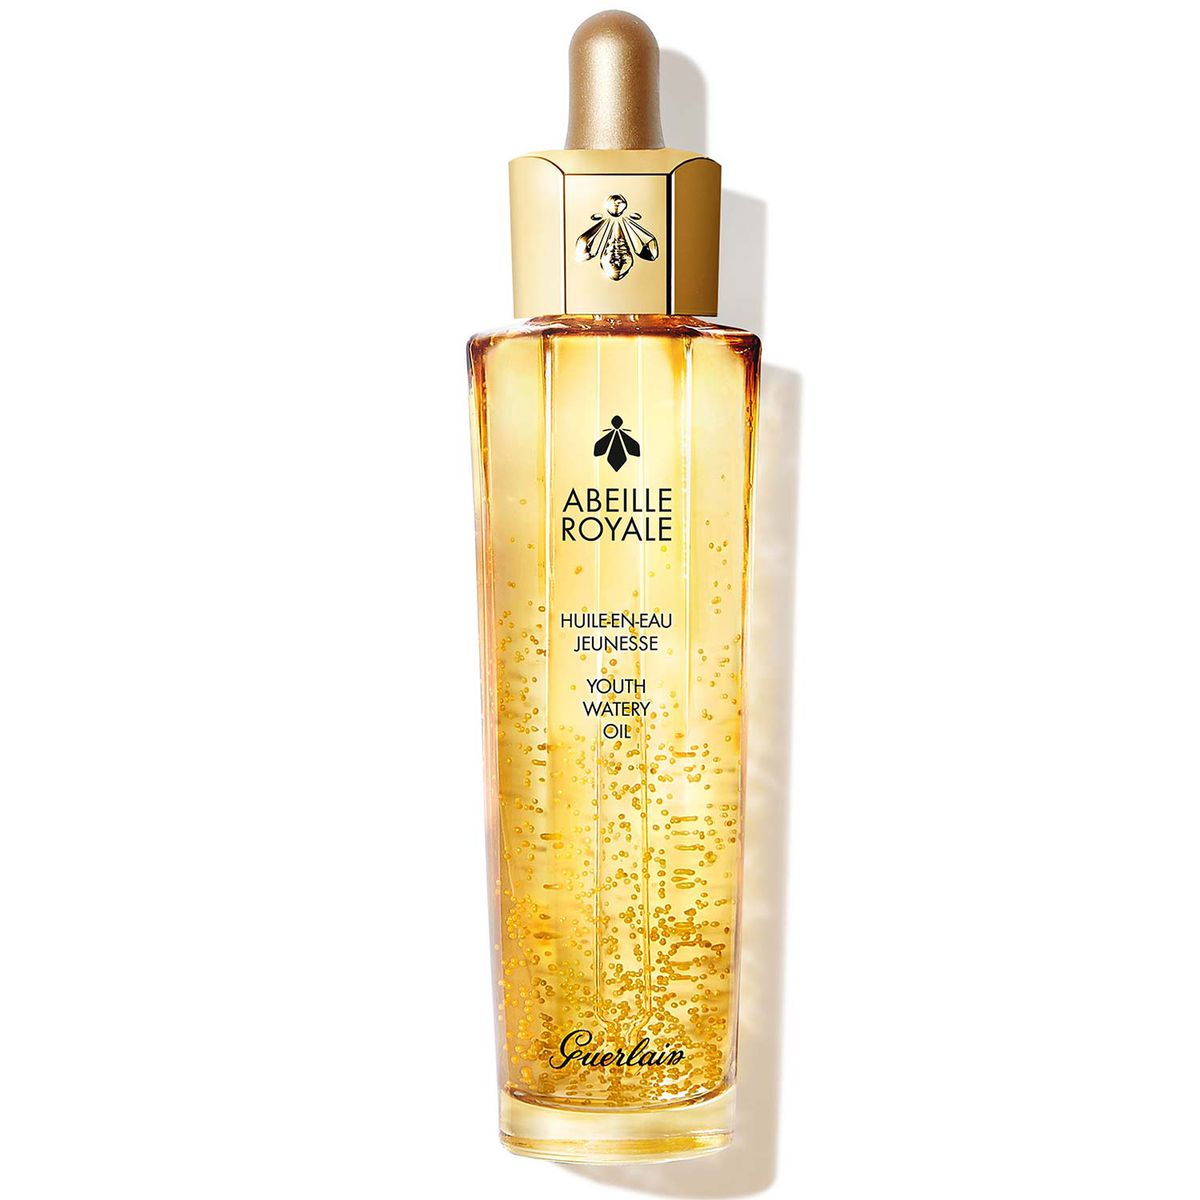 Abeille Royale Anti-Aging Youth Watery Oil GUERLAIN